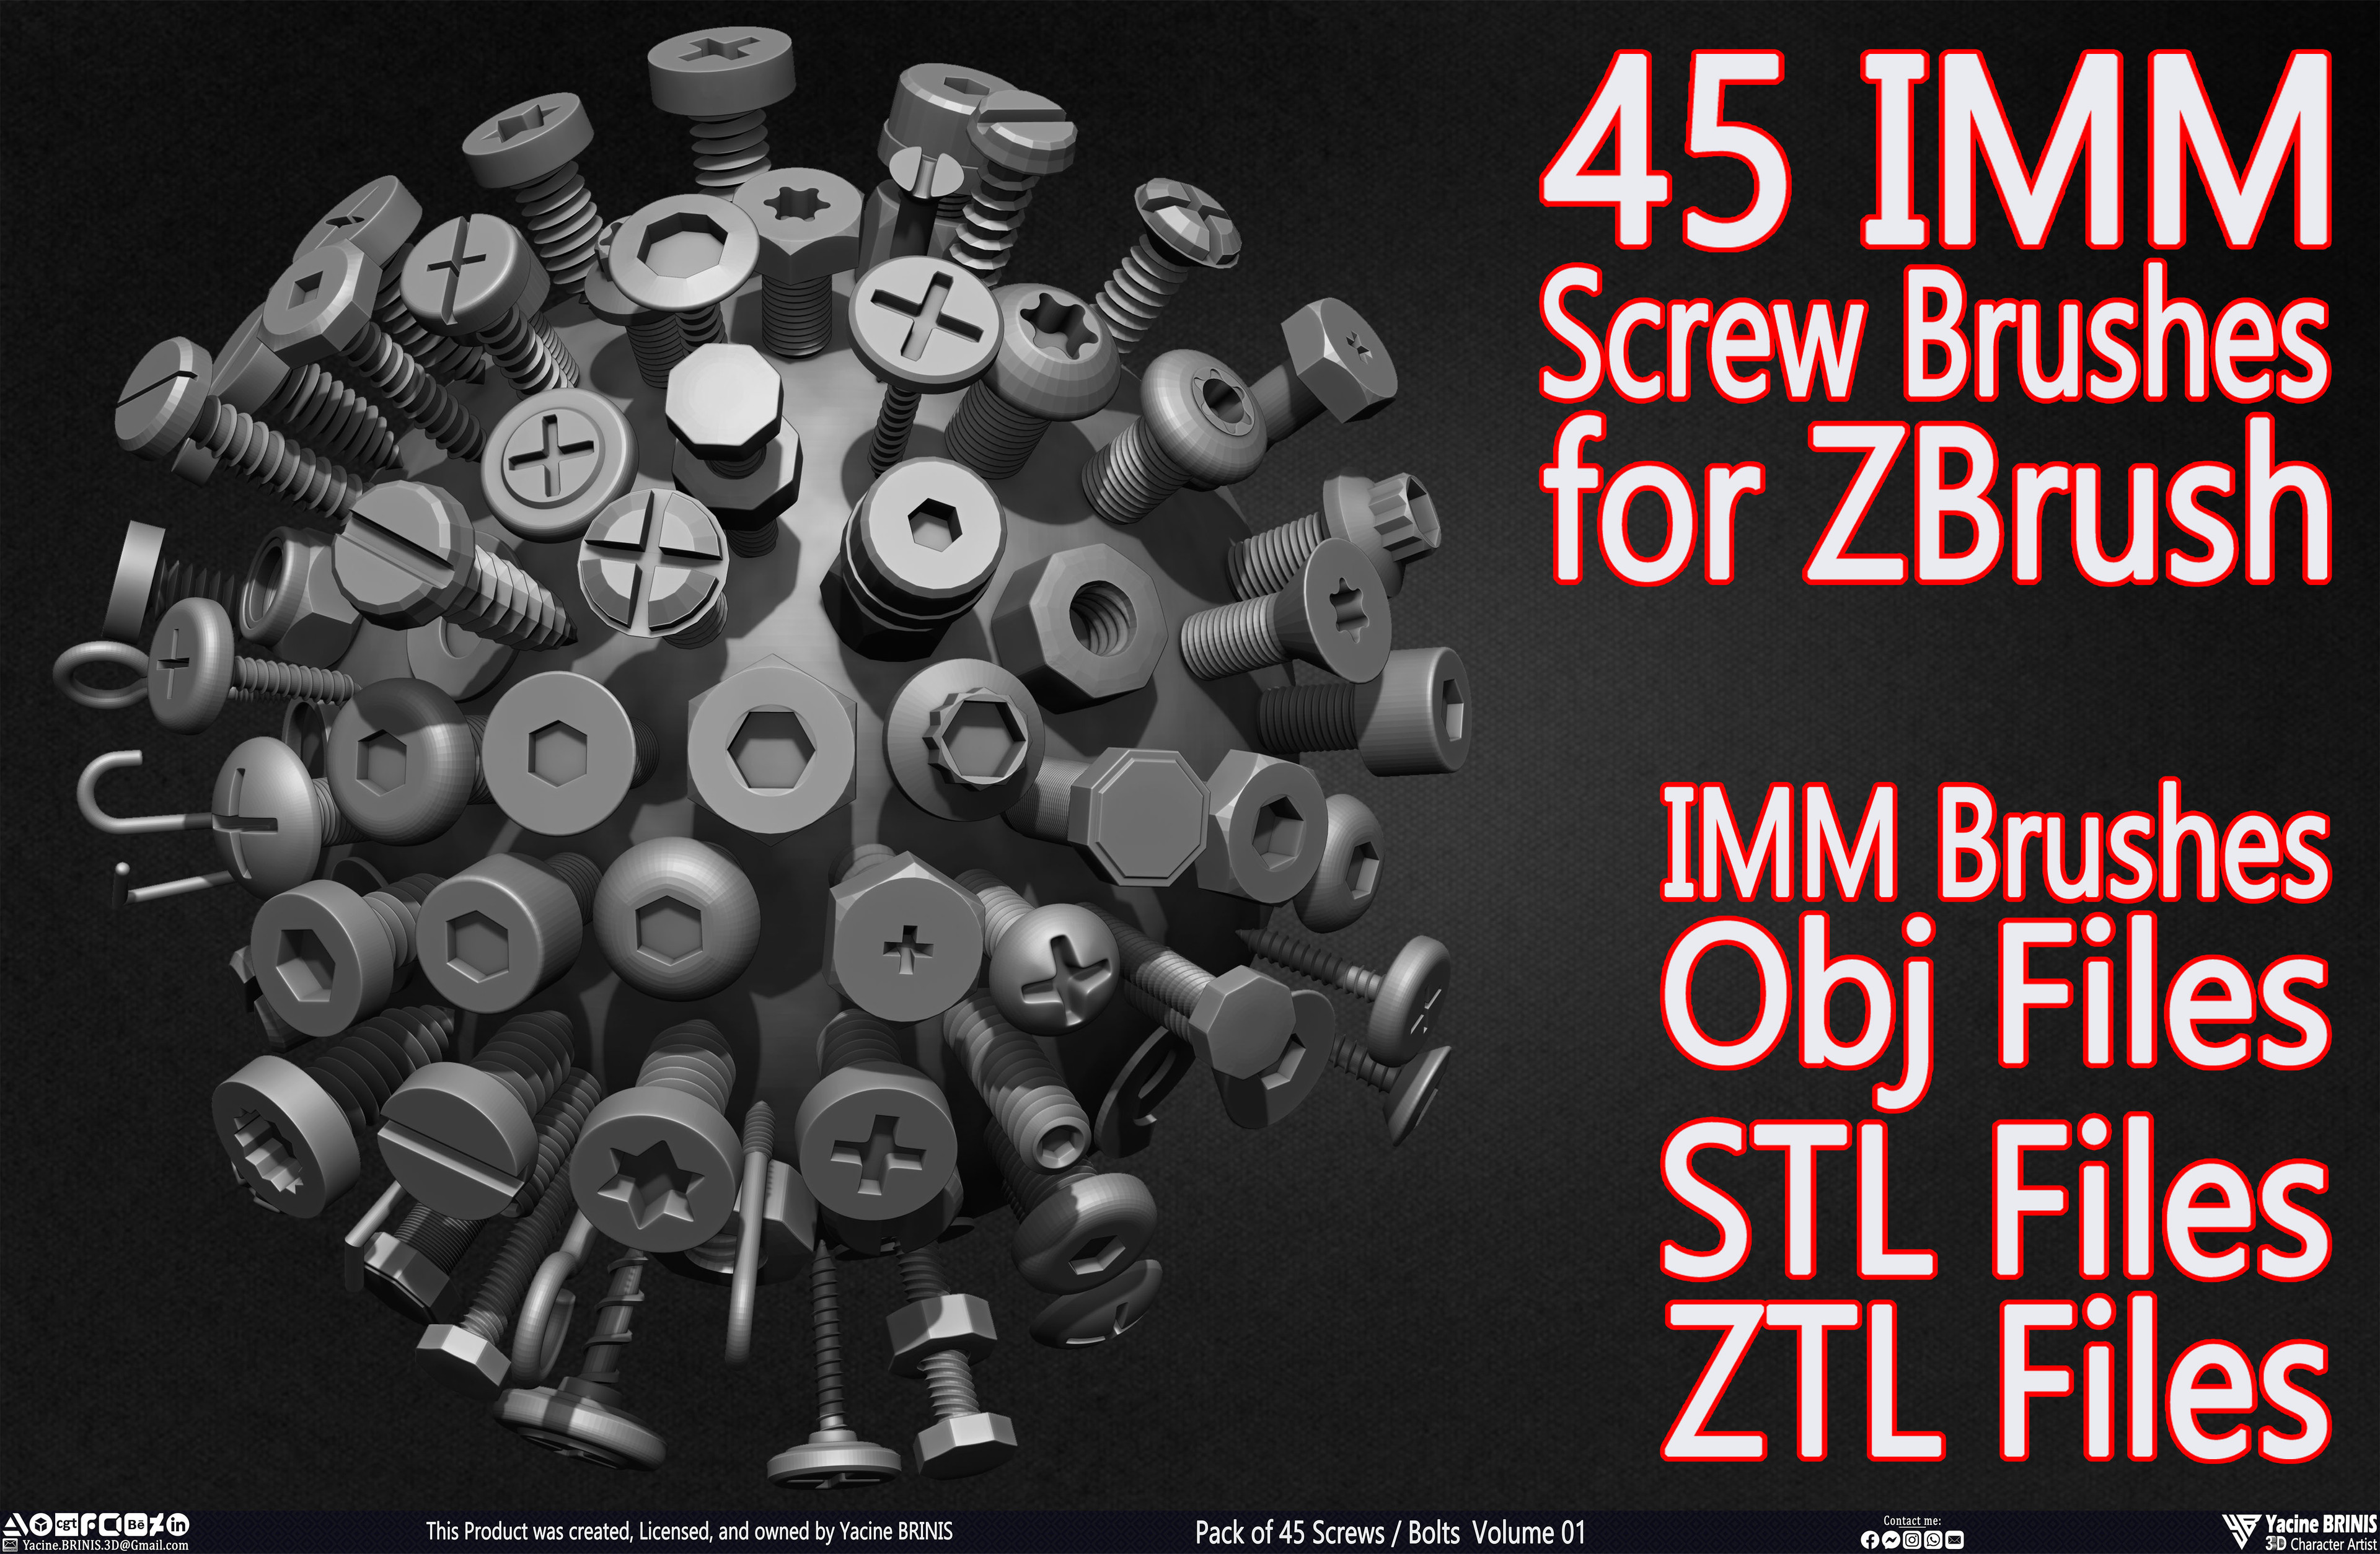 Pack of 45 Screws-Bolts Volume 01 Sculpted By Yacine BRINIS Set 006